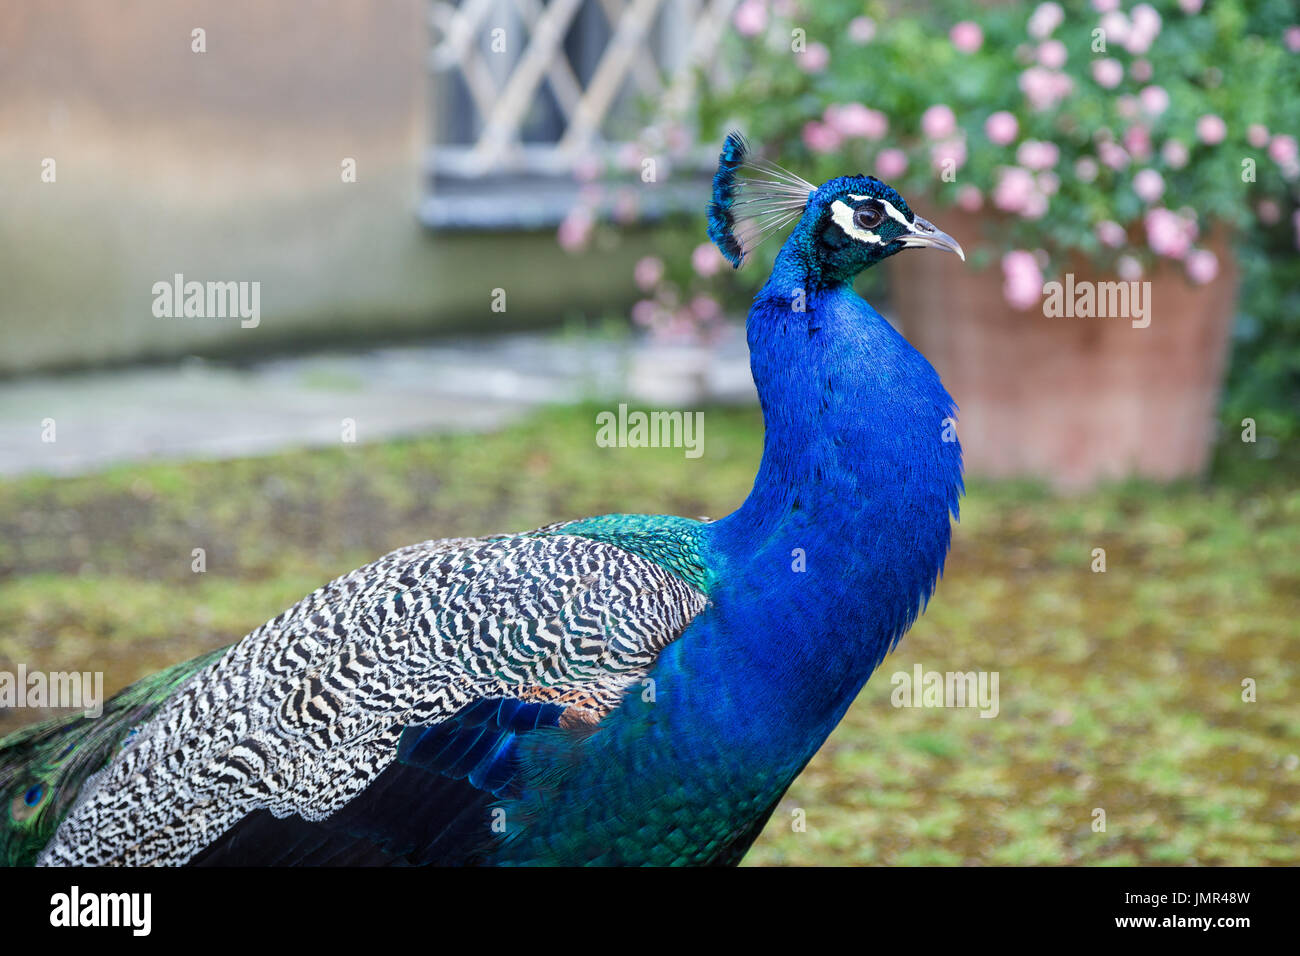 Close-up of colorful Peacock (Indian peafowl or blue peafowl (Pavo cristatus)) at the Vojan Gardens (Vojanovy sady) in Prague, Czech Republic. Stock Photo